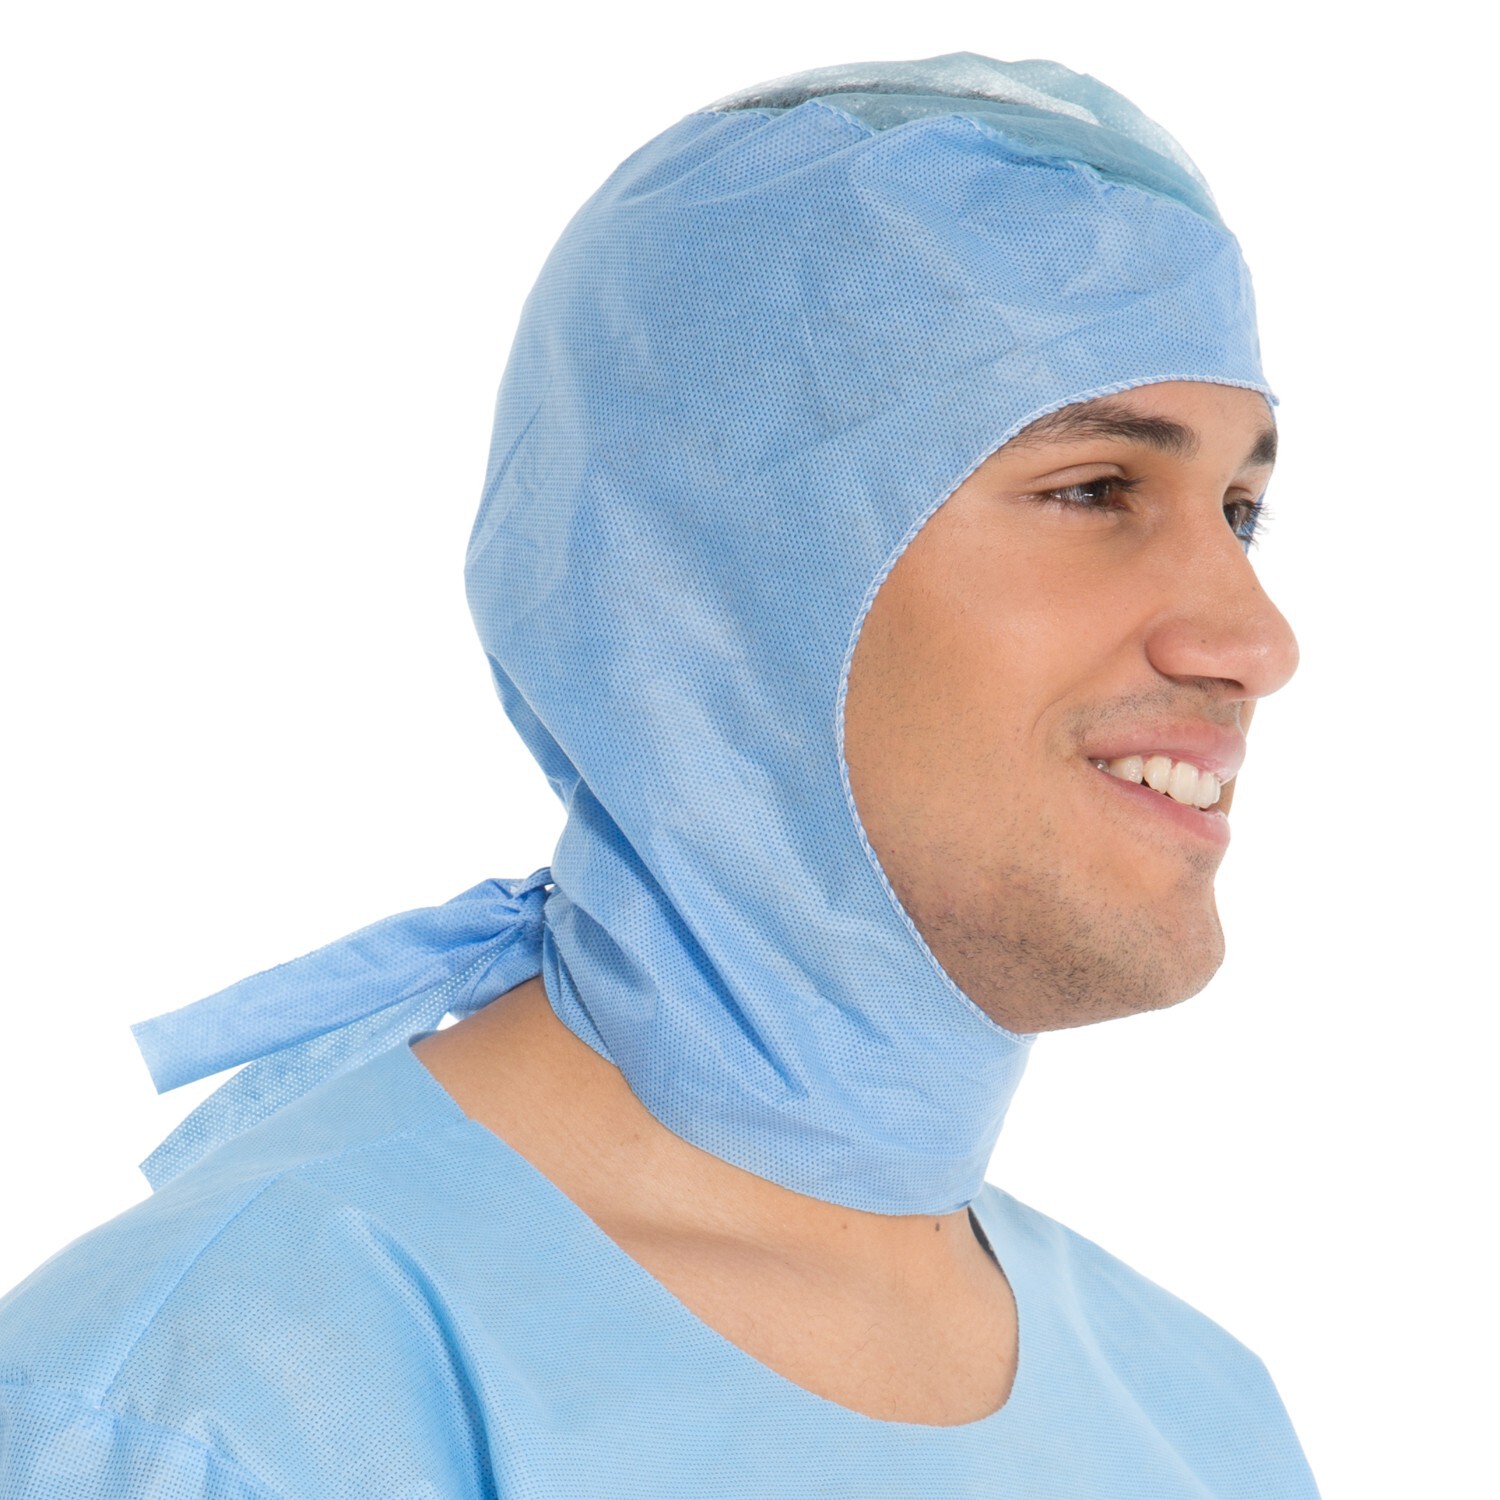 Hood Cap - safeops surgical care